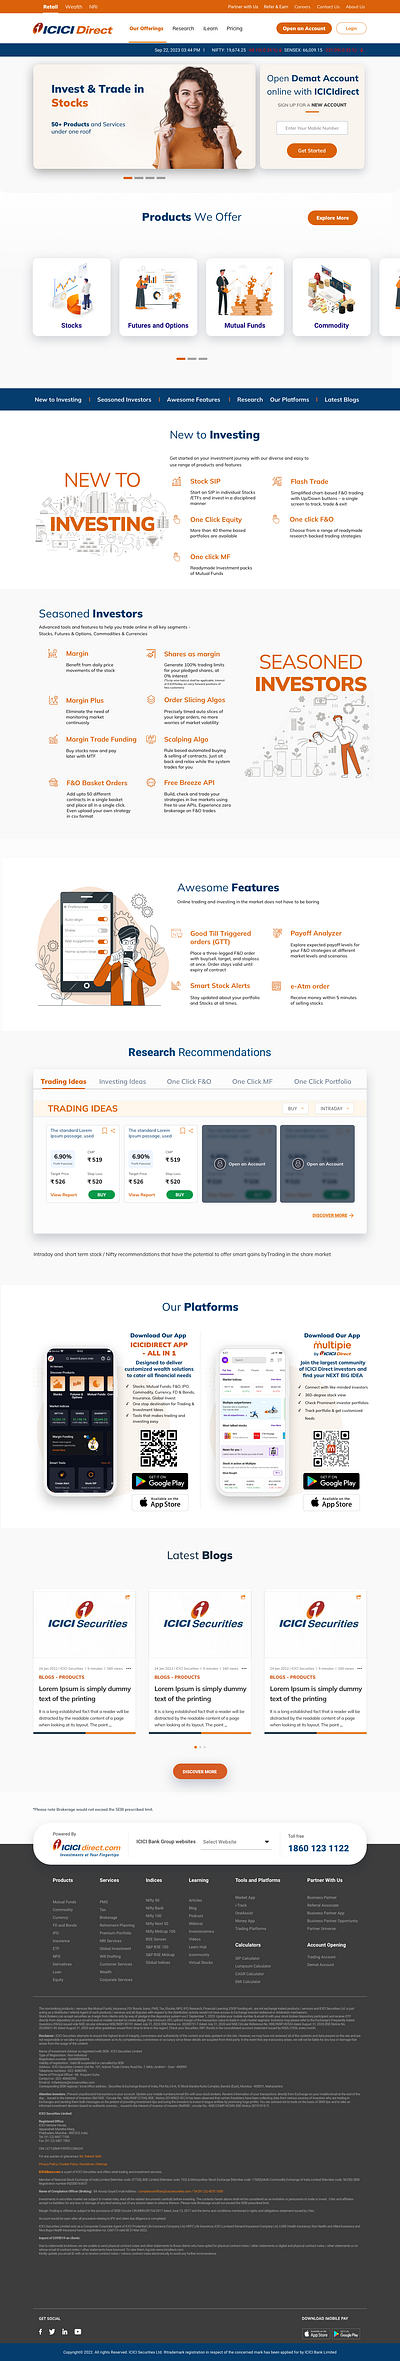 ICICI Direct Home Page For New Custome home page landing page ui user interface (ui) design